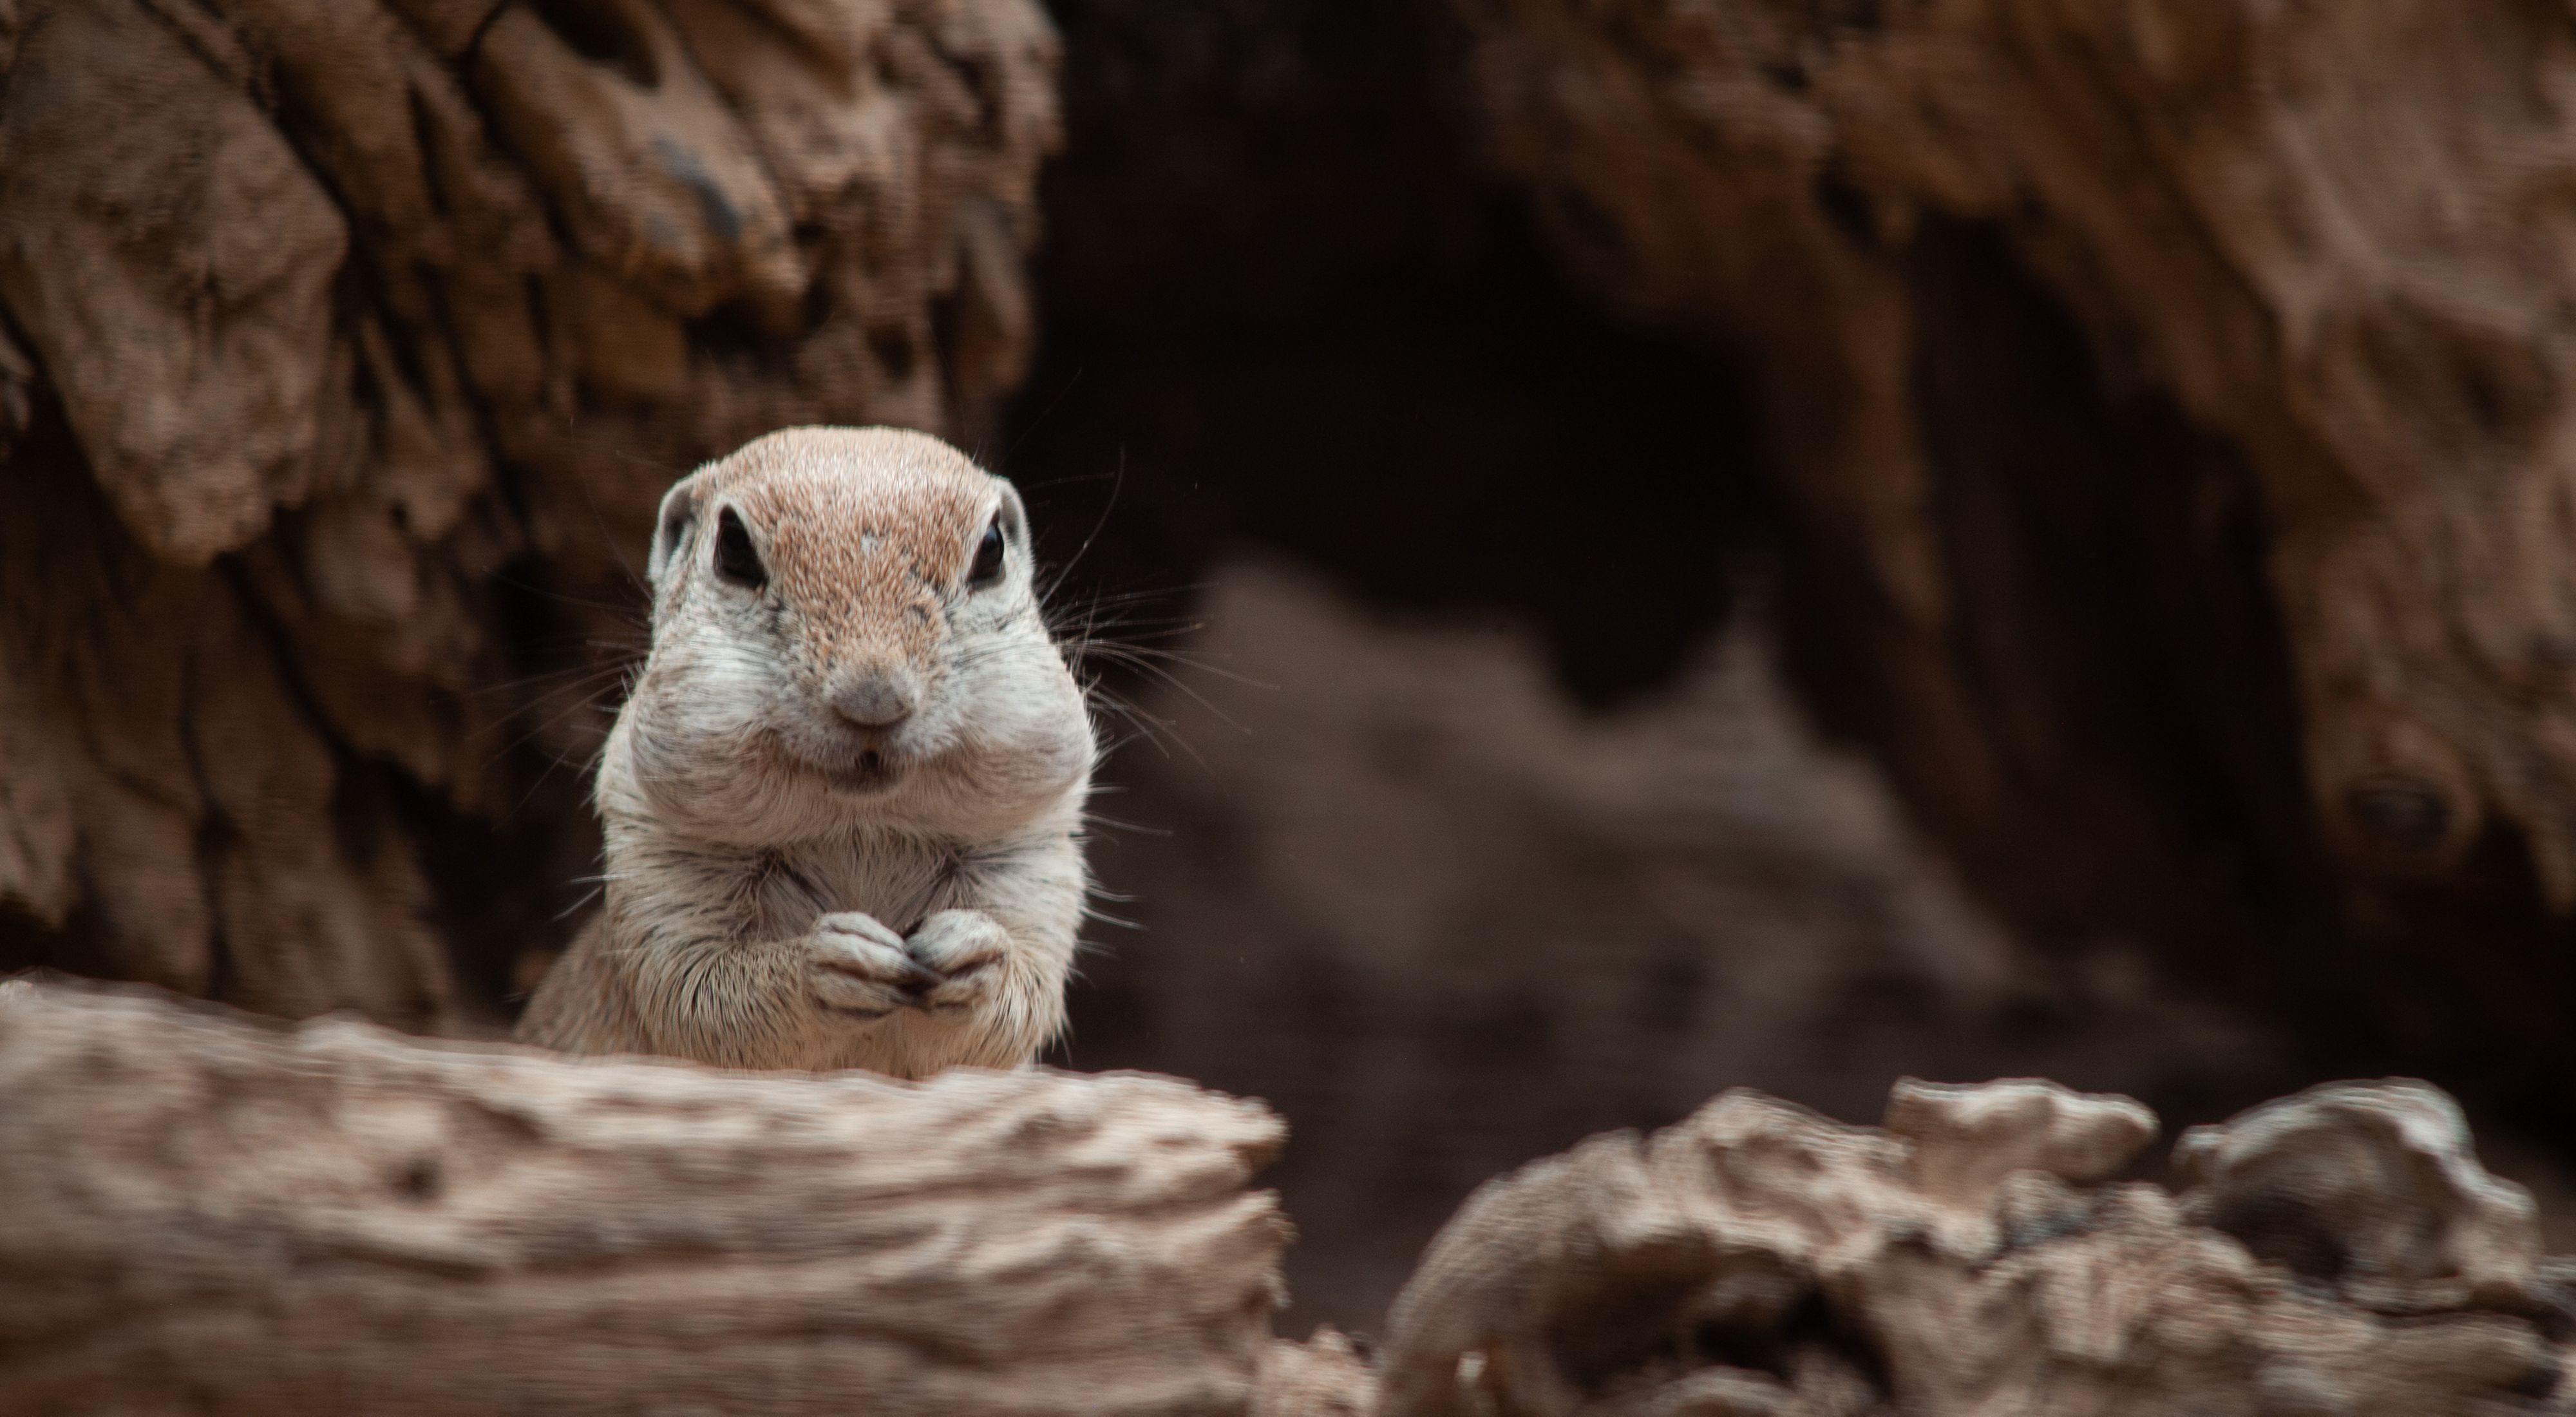 A close up of a ground squirrel looking at the camera.